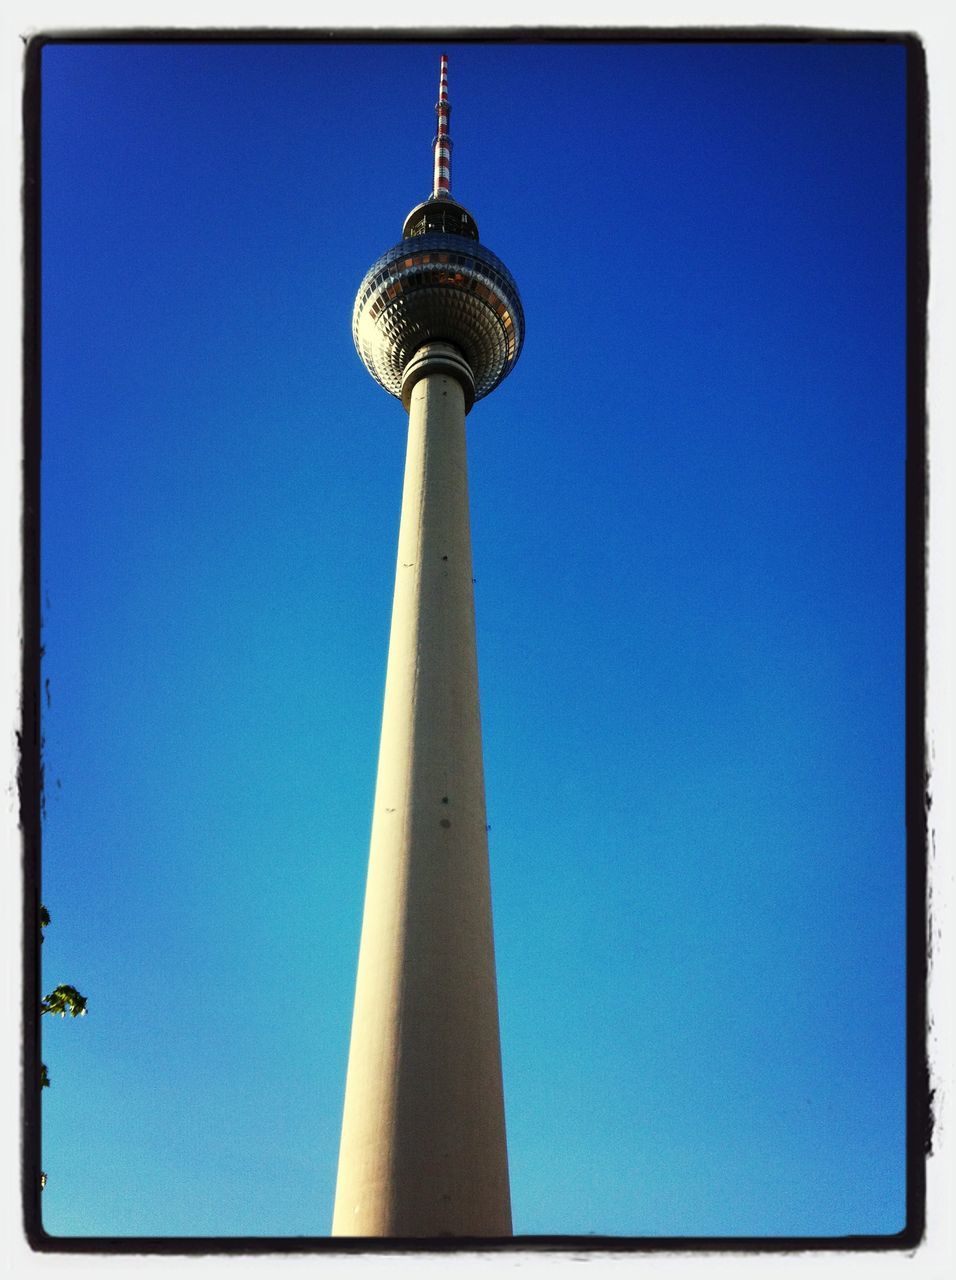 communications tower, tower, tall - high, architecture, built structure, television tower, fernsehturm, international landmark, communication, low angle view, spire, famous place, building exterior, tourism, travel destinations, capital cities, clear sky, blue, culture, travel